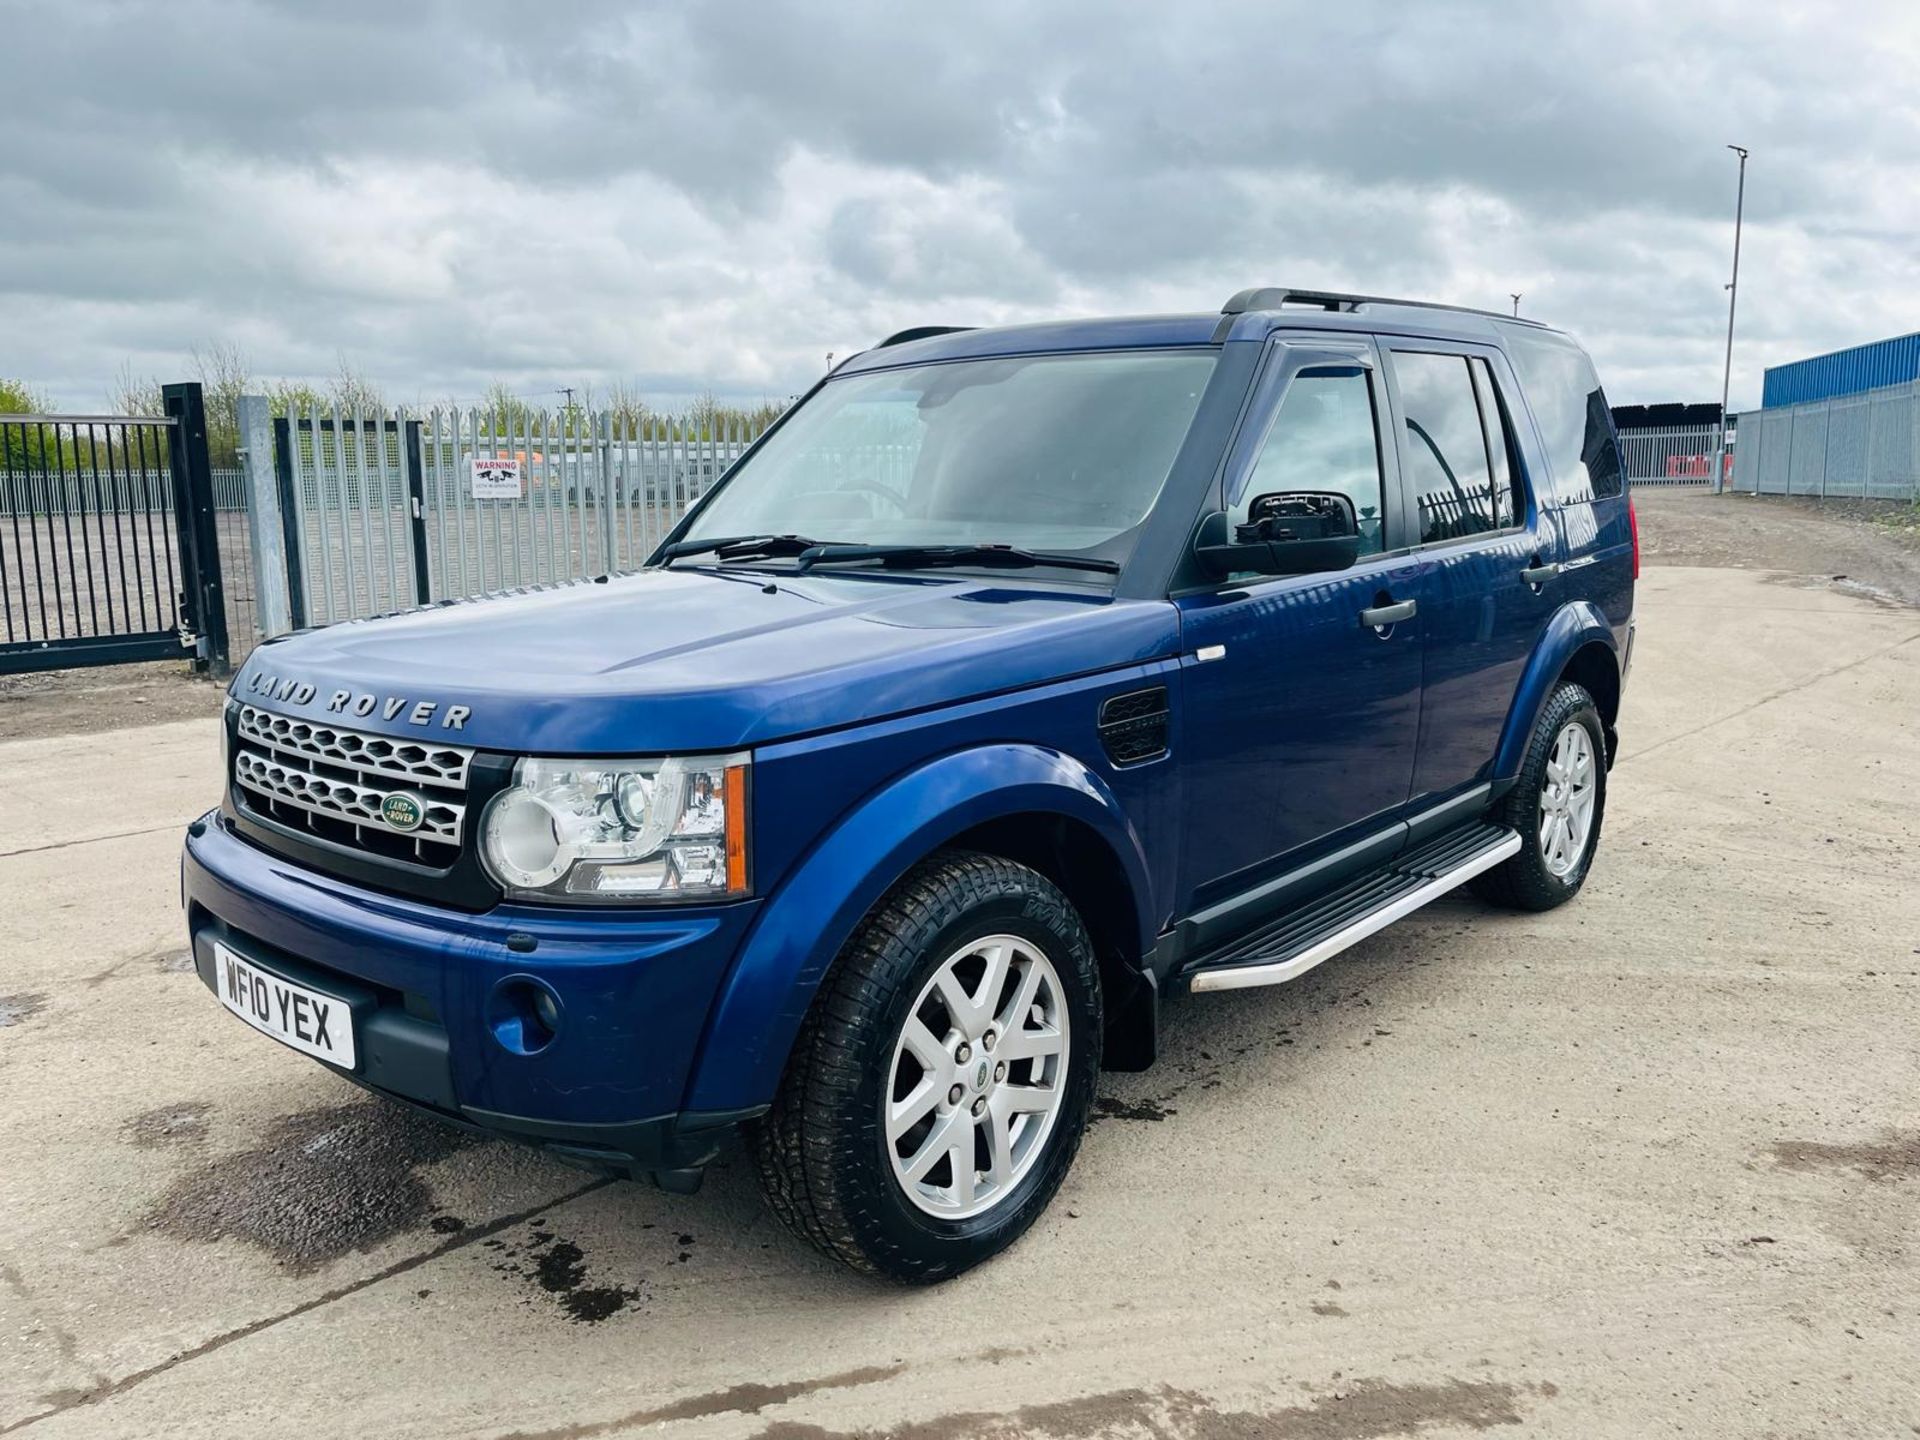 ** ON SALE ** Land Rover Discovery 4 2.7 TDV6 Commercial Van Auto -A/C-Sat Nav-Bluetooth Handsfree - Image 3 of 31